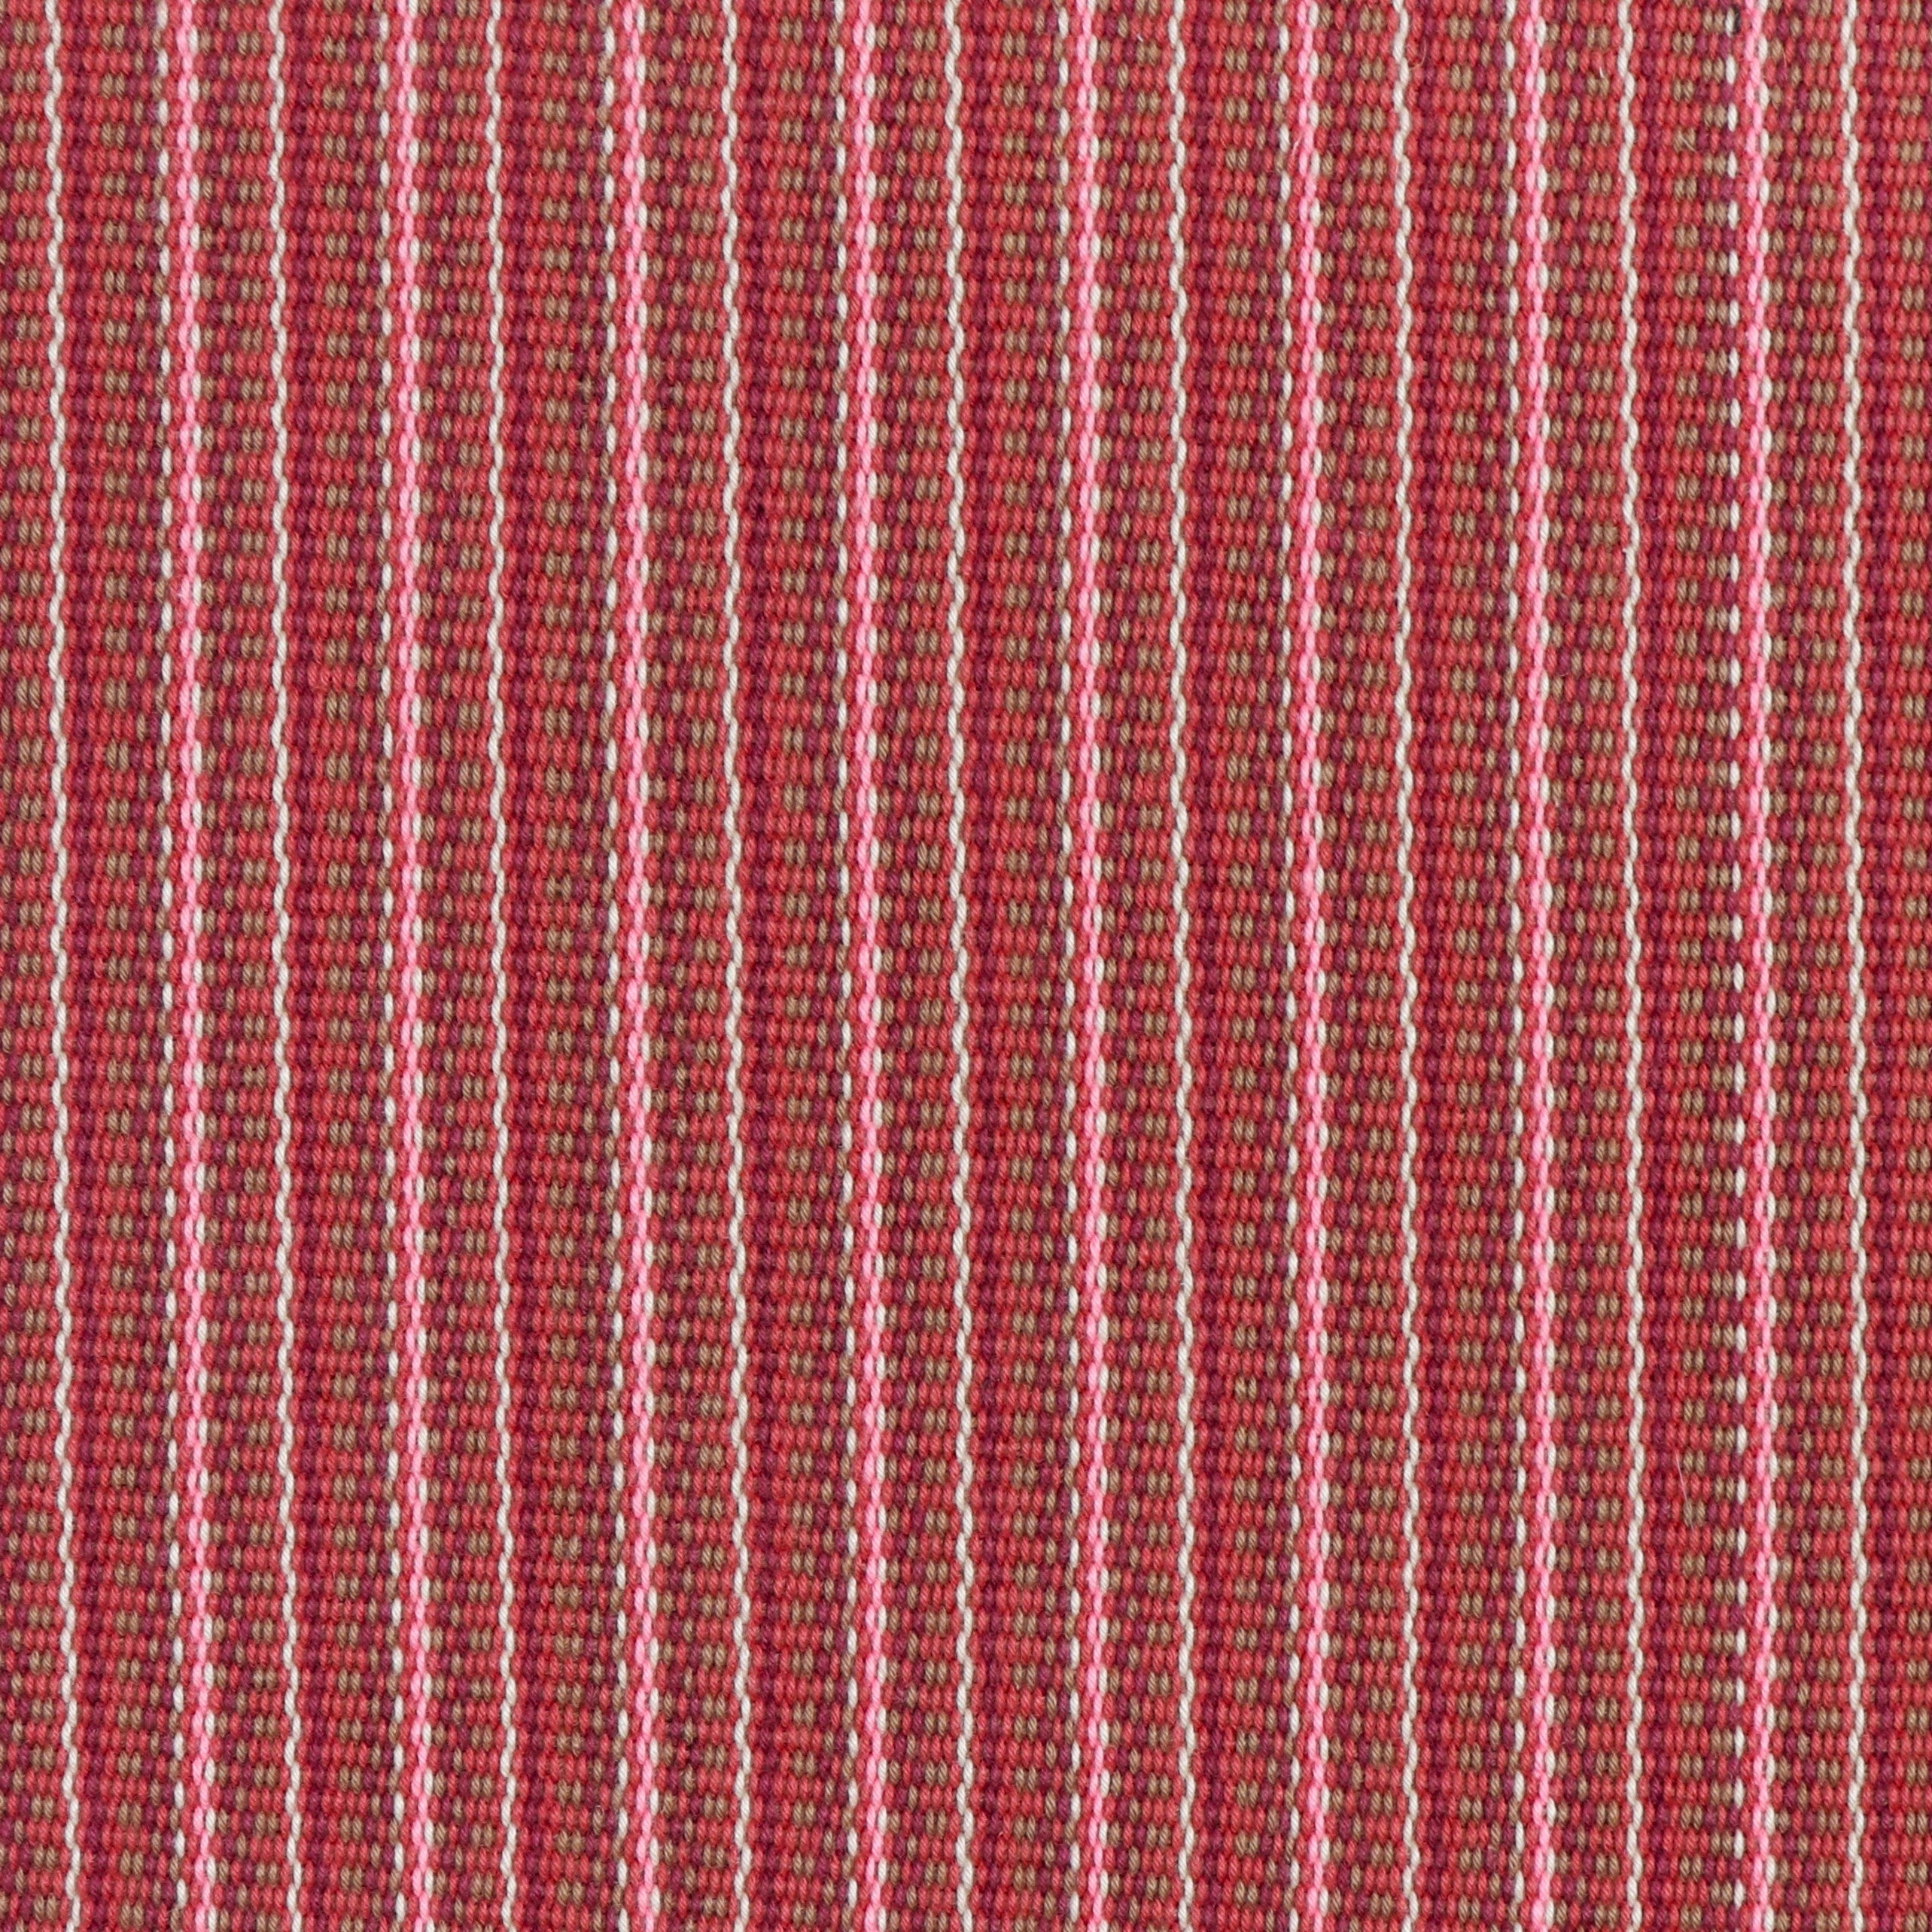 Detail of a hand-woven cotton fabric in an intricate stripe pattern in shades of pink, red and white.